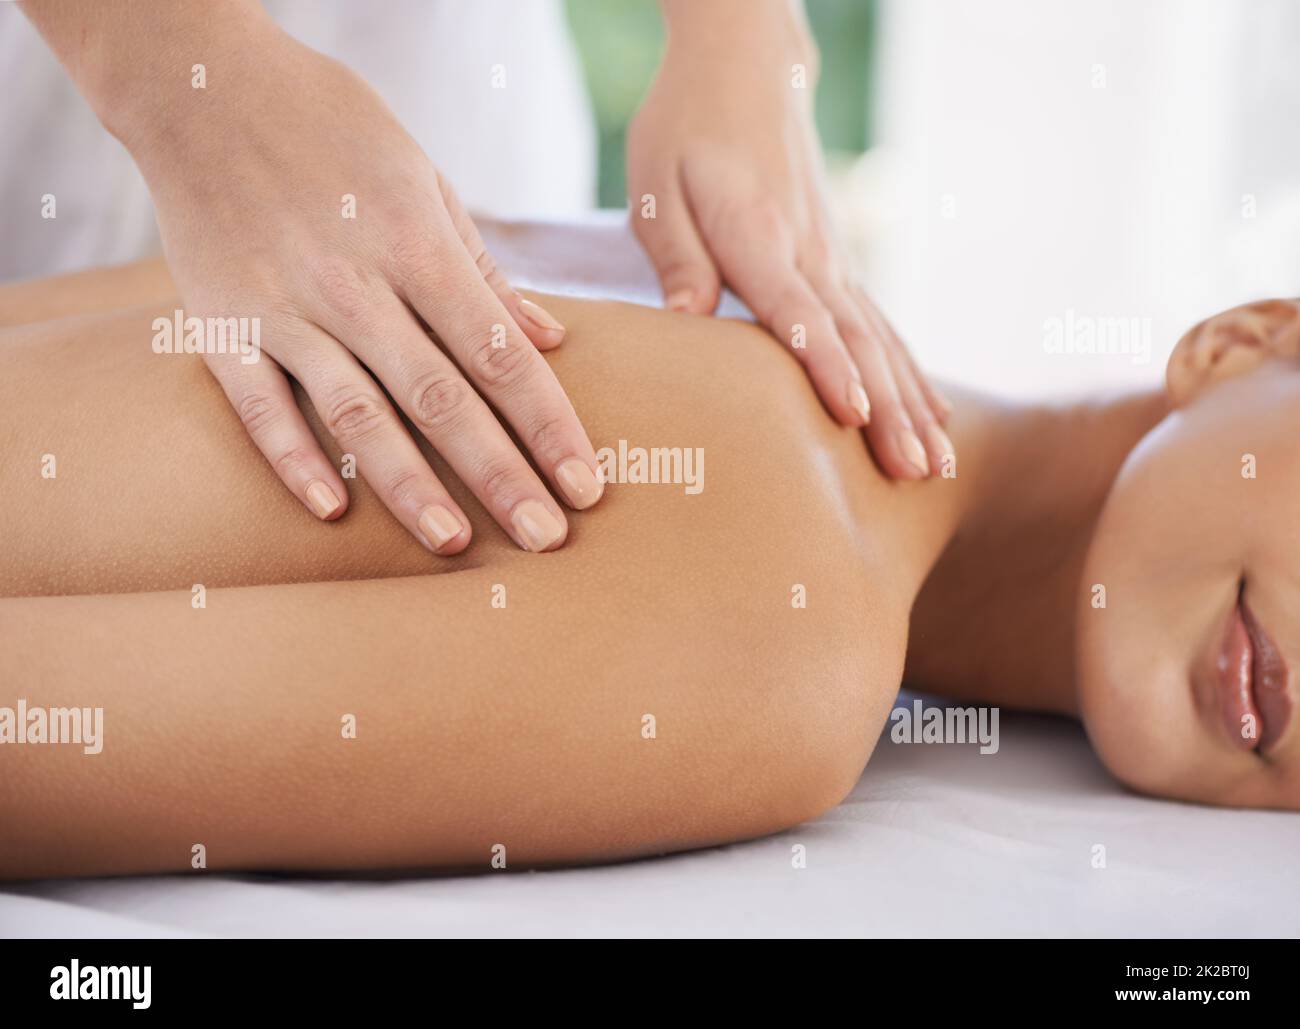 Enjoy some you time. A young woman relaxing in a health spa. Stock Photo